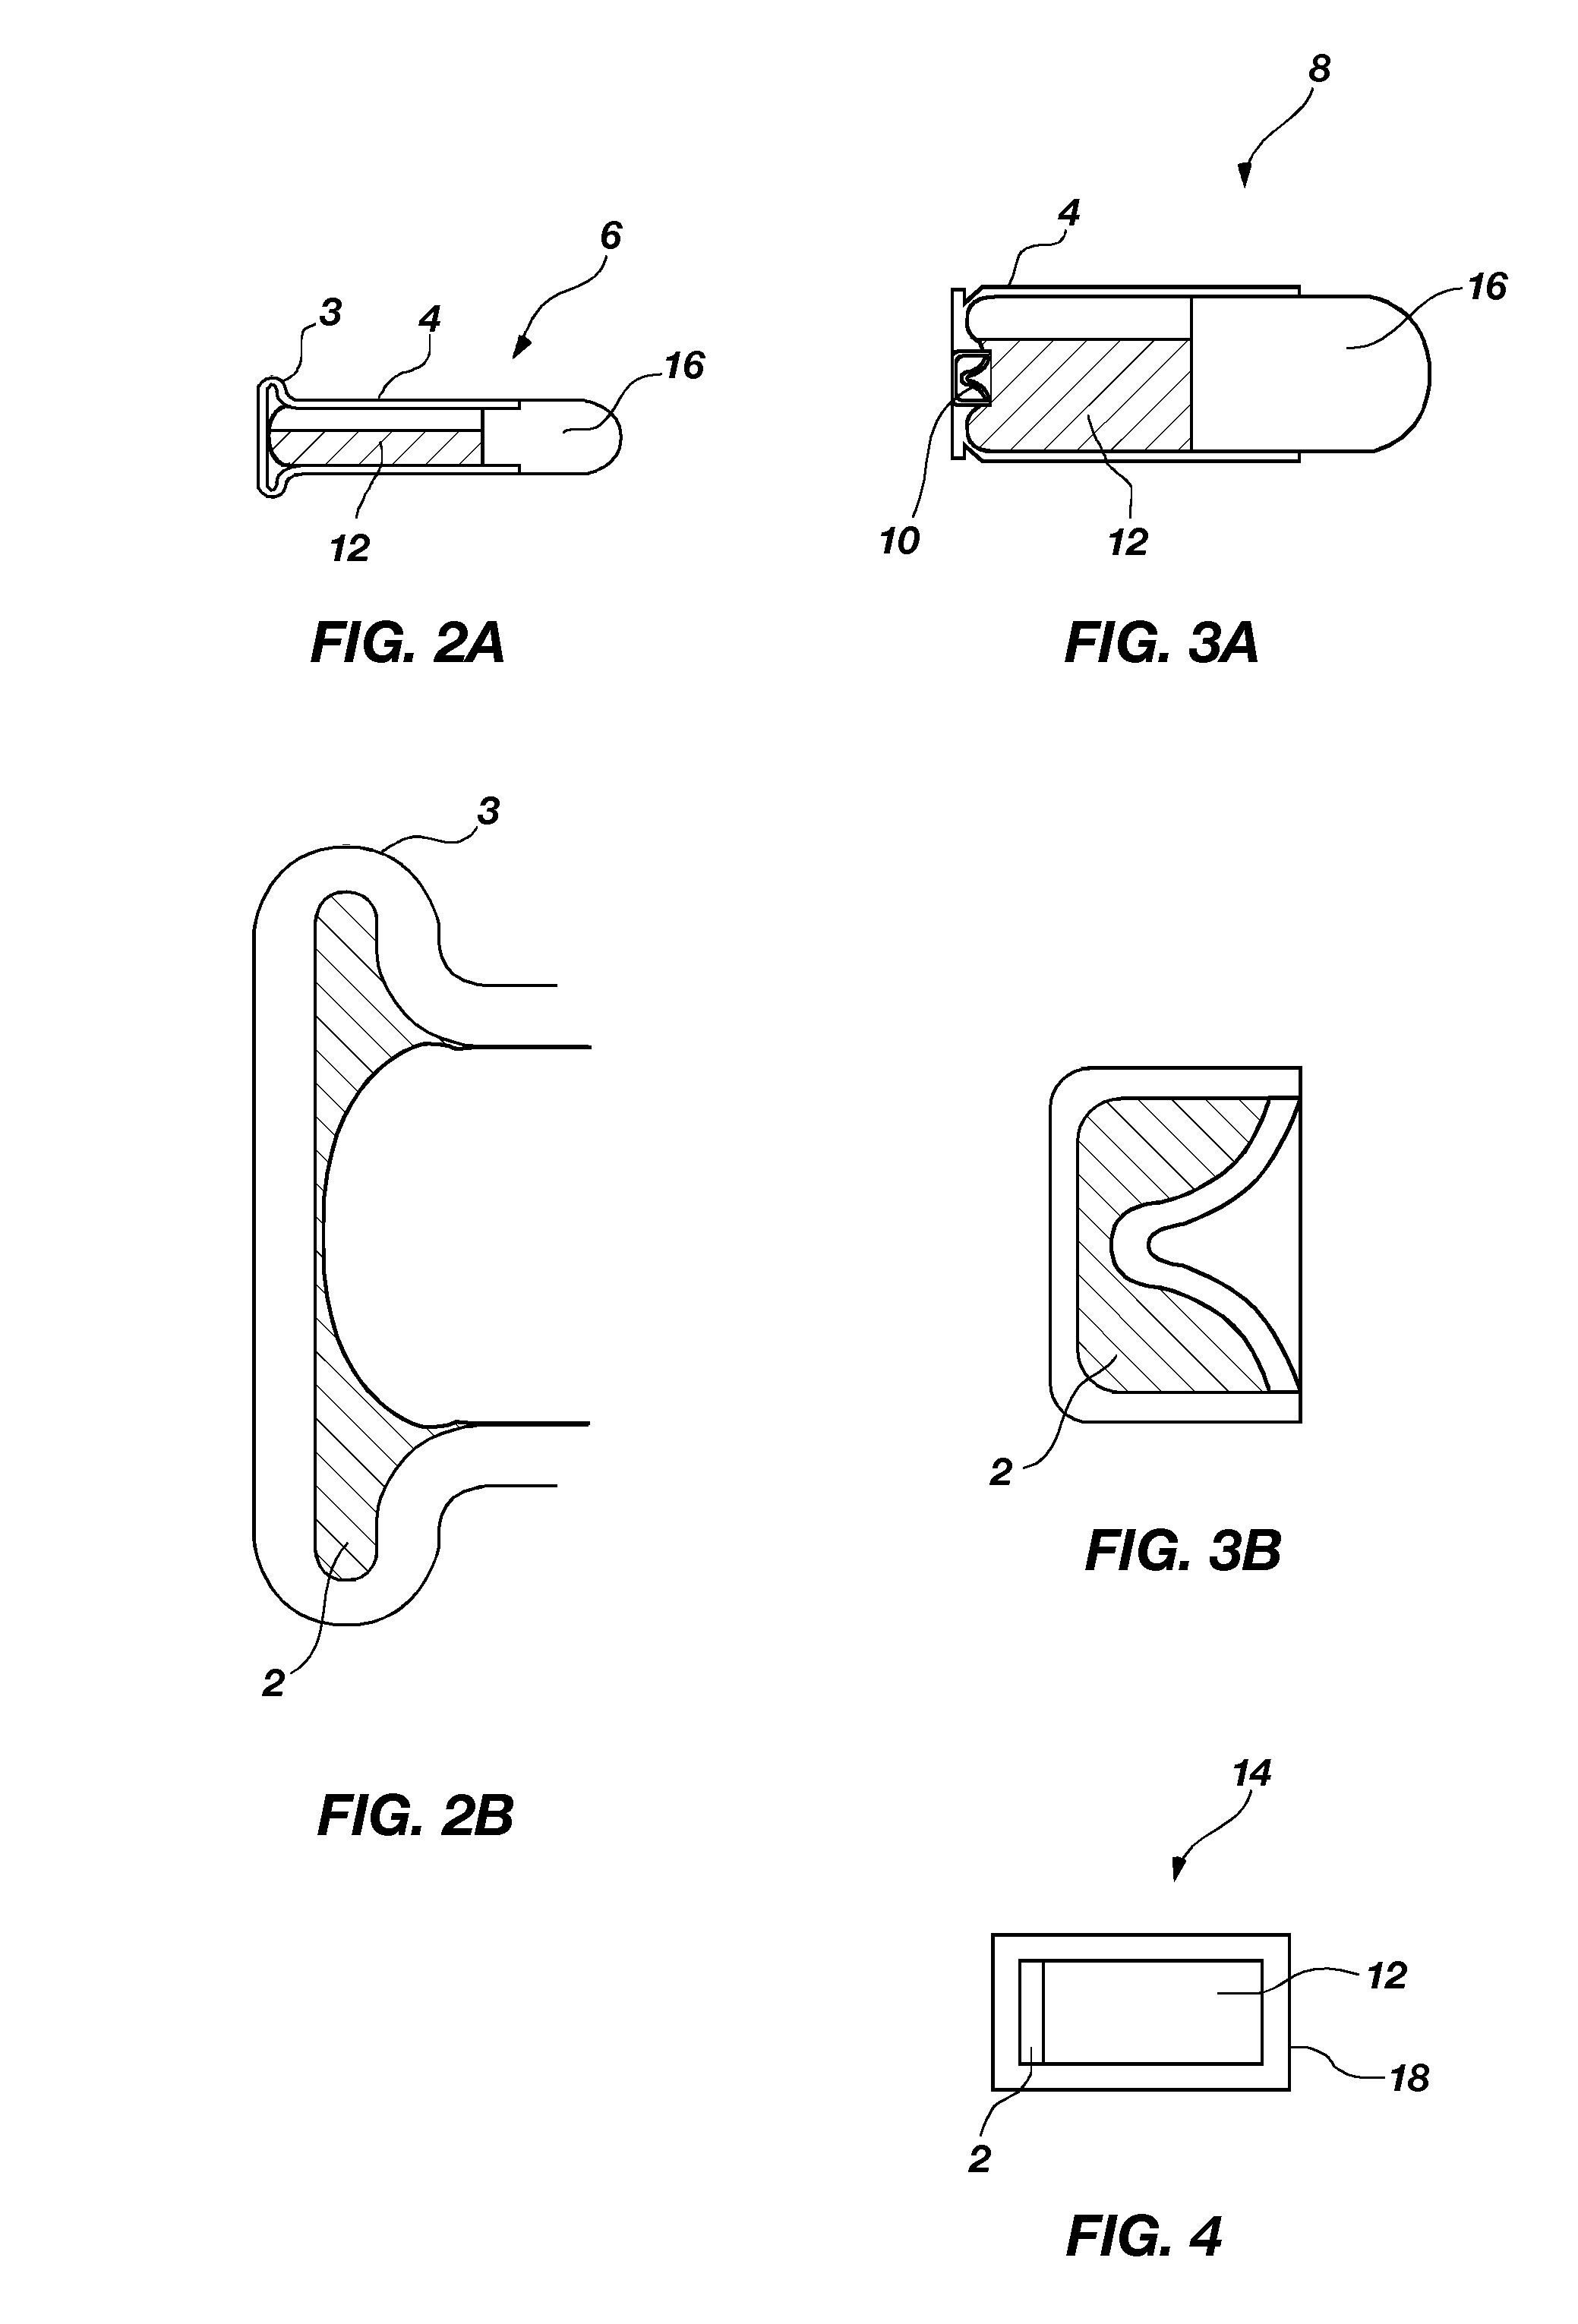 Methods of forming a sensitized explosive and a percussion primer